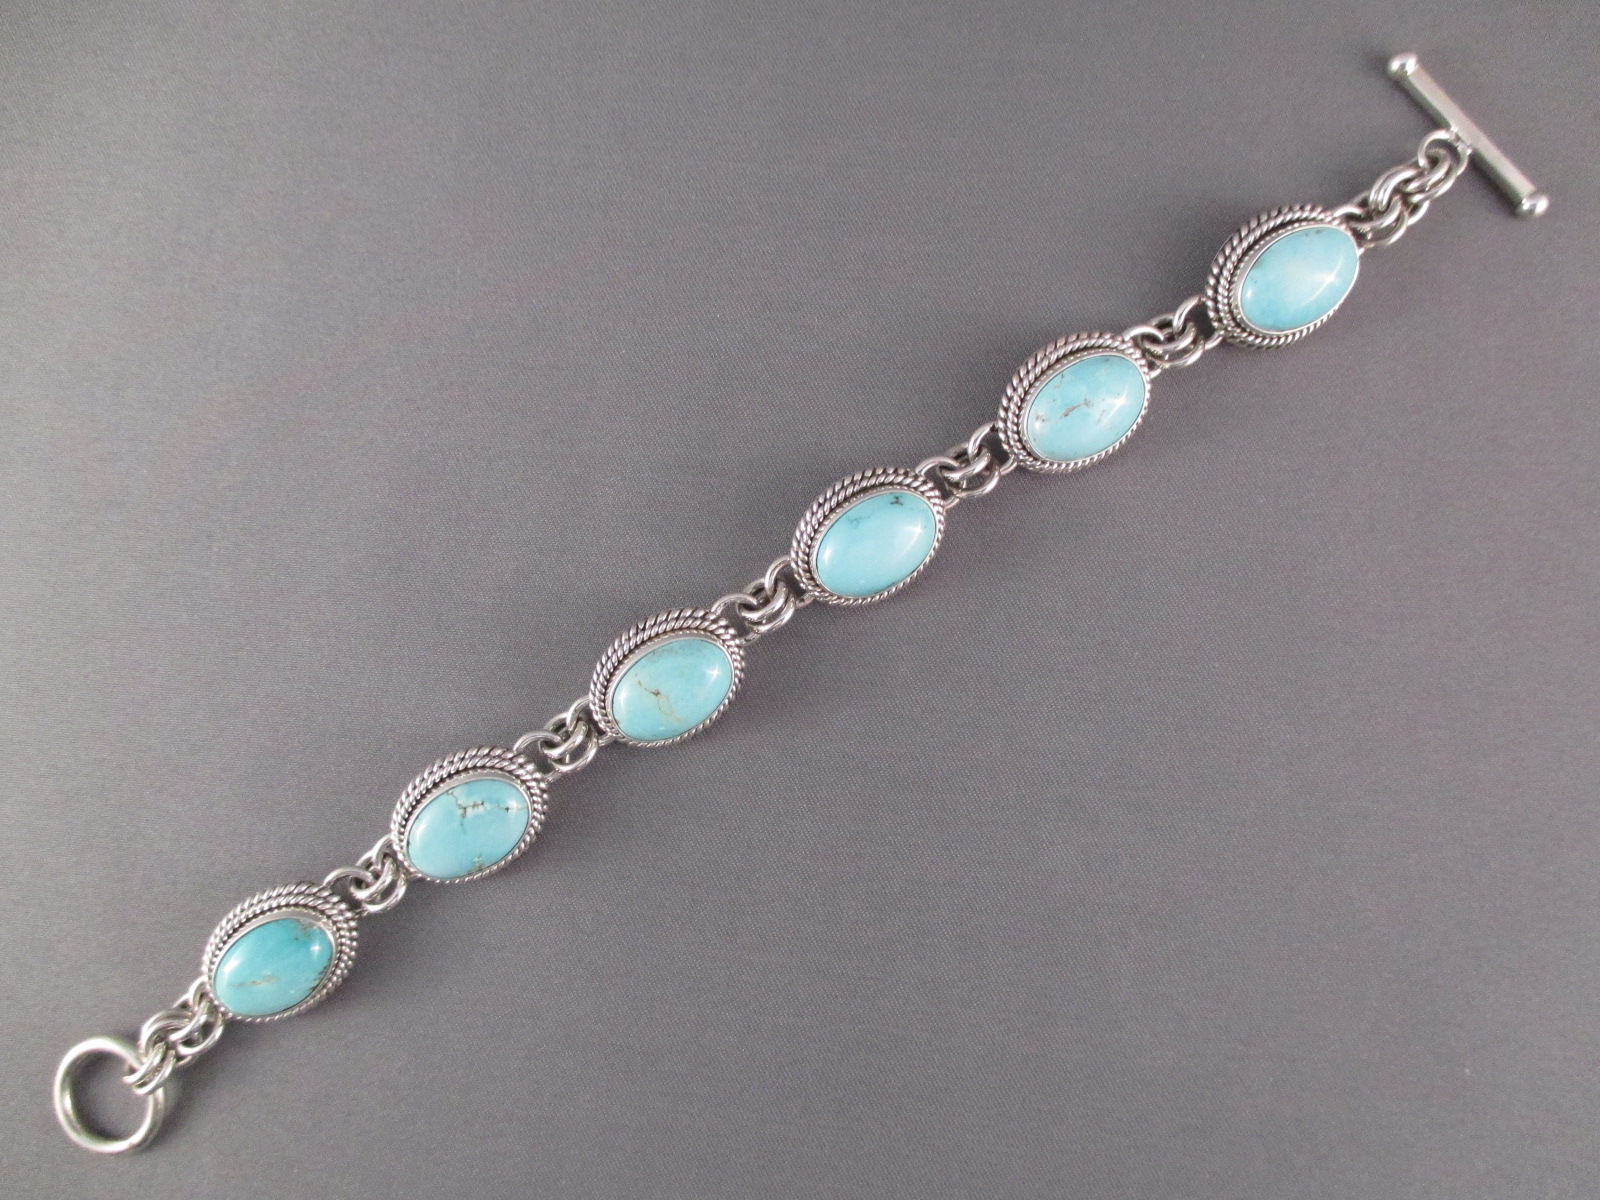 Artie Yellowhorse Link Bracelet with Carico Lake Turquoise